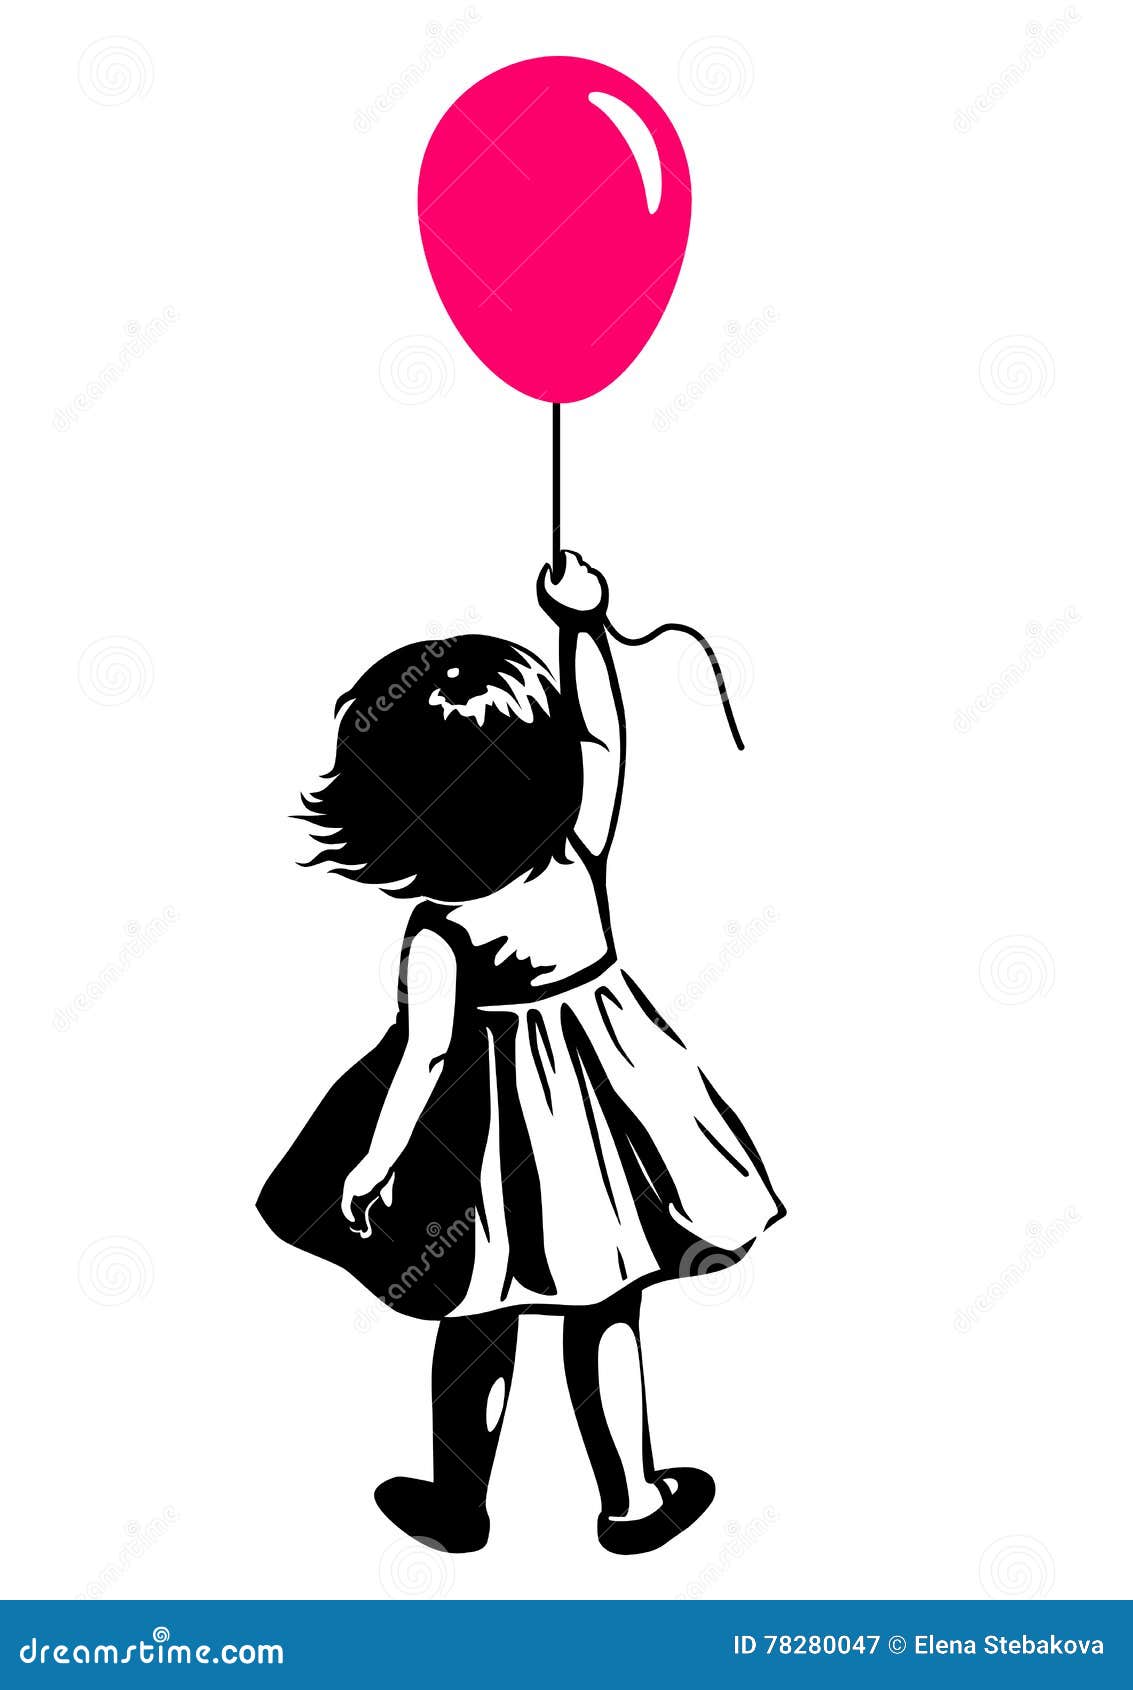 toddler girl with red balloon, street art graffiti style